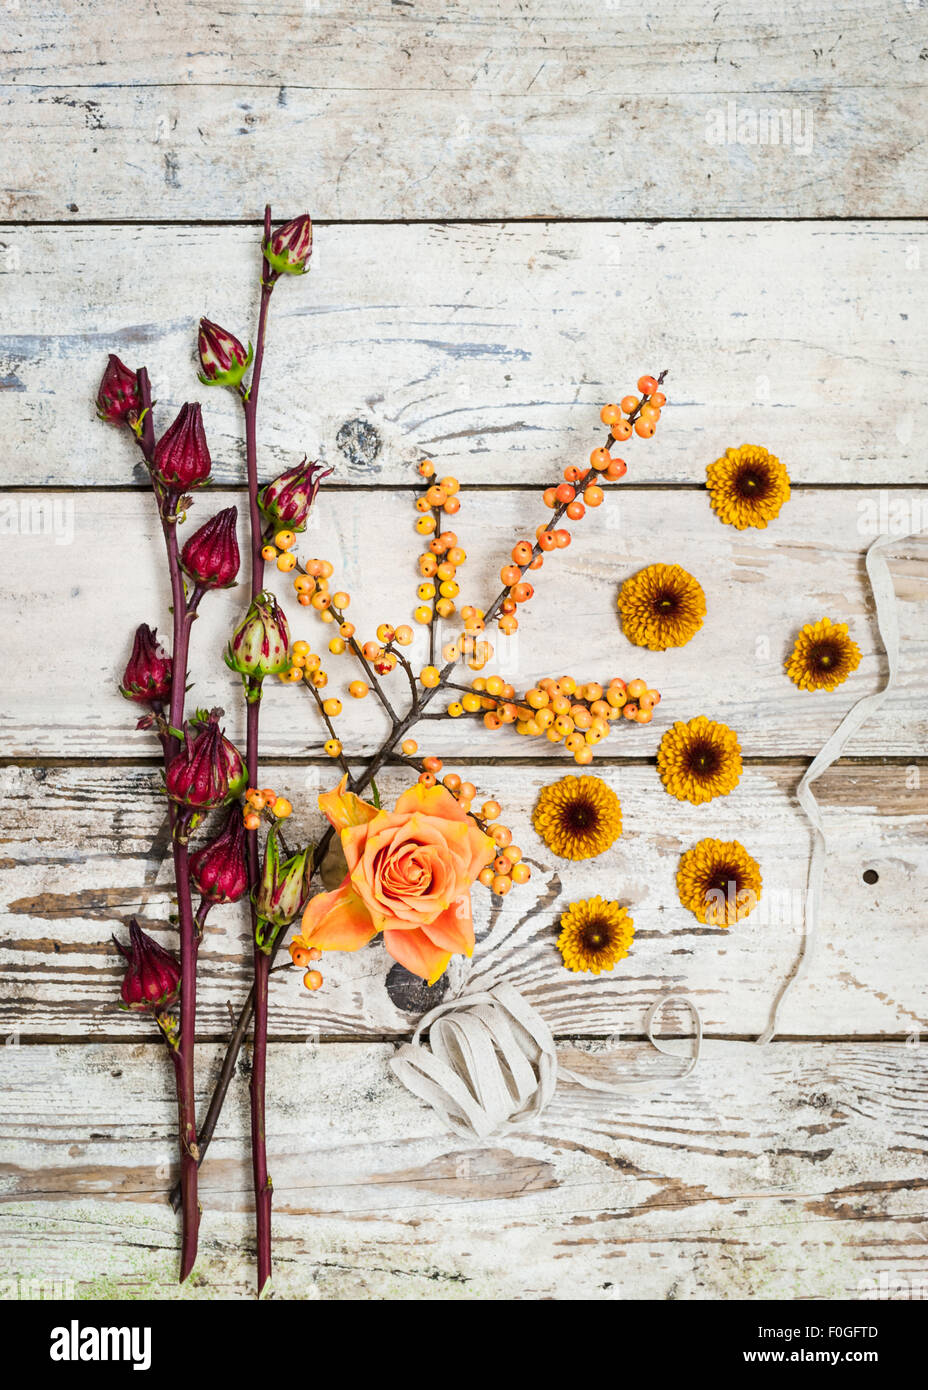 Autumn Fall still life with flowers berries ribbon on rustic wooden surface Stock Photo